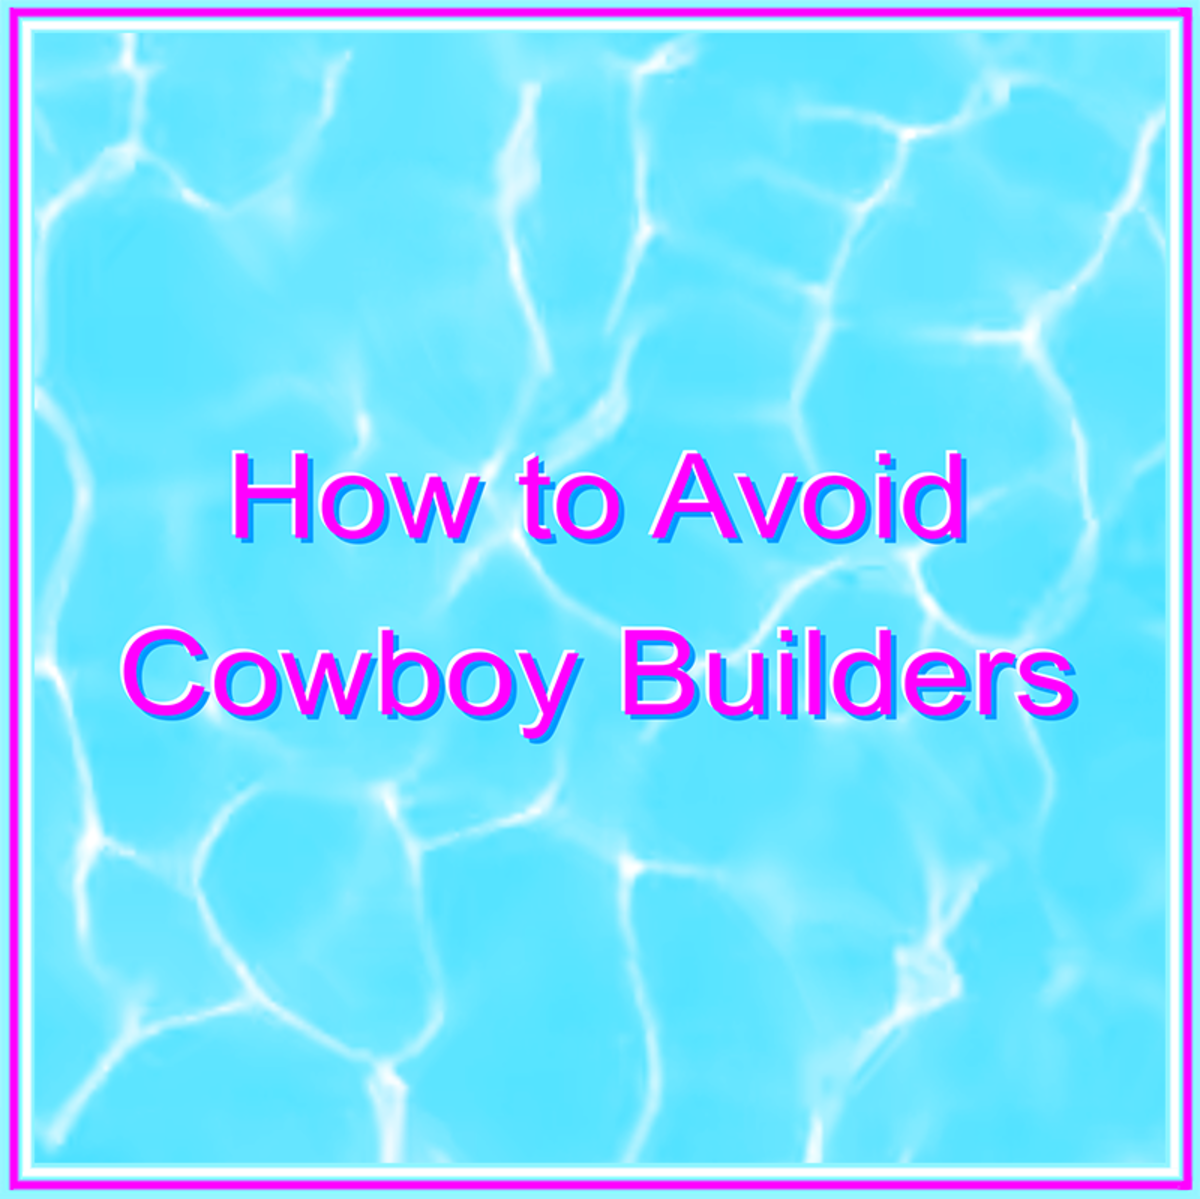 Cowboy Builders From Hell—The Final Battle